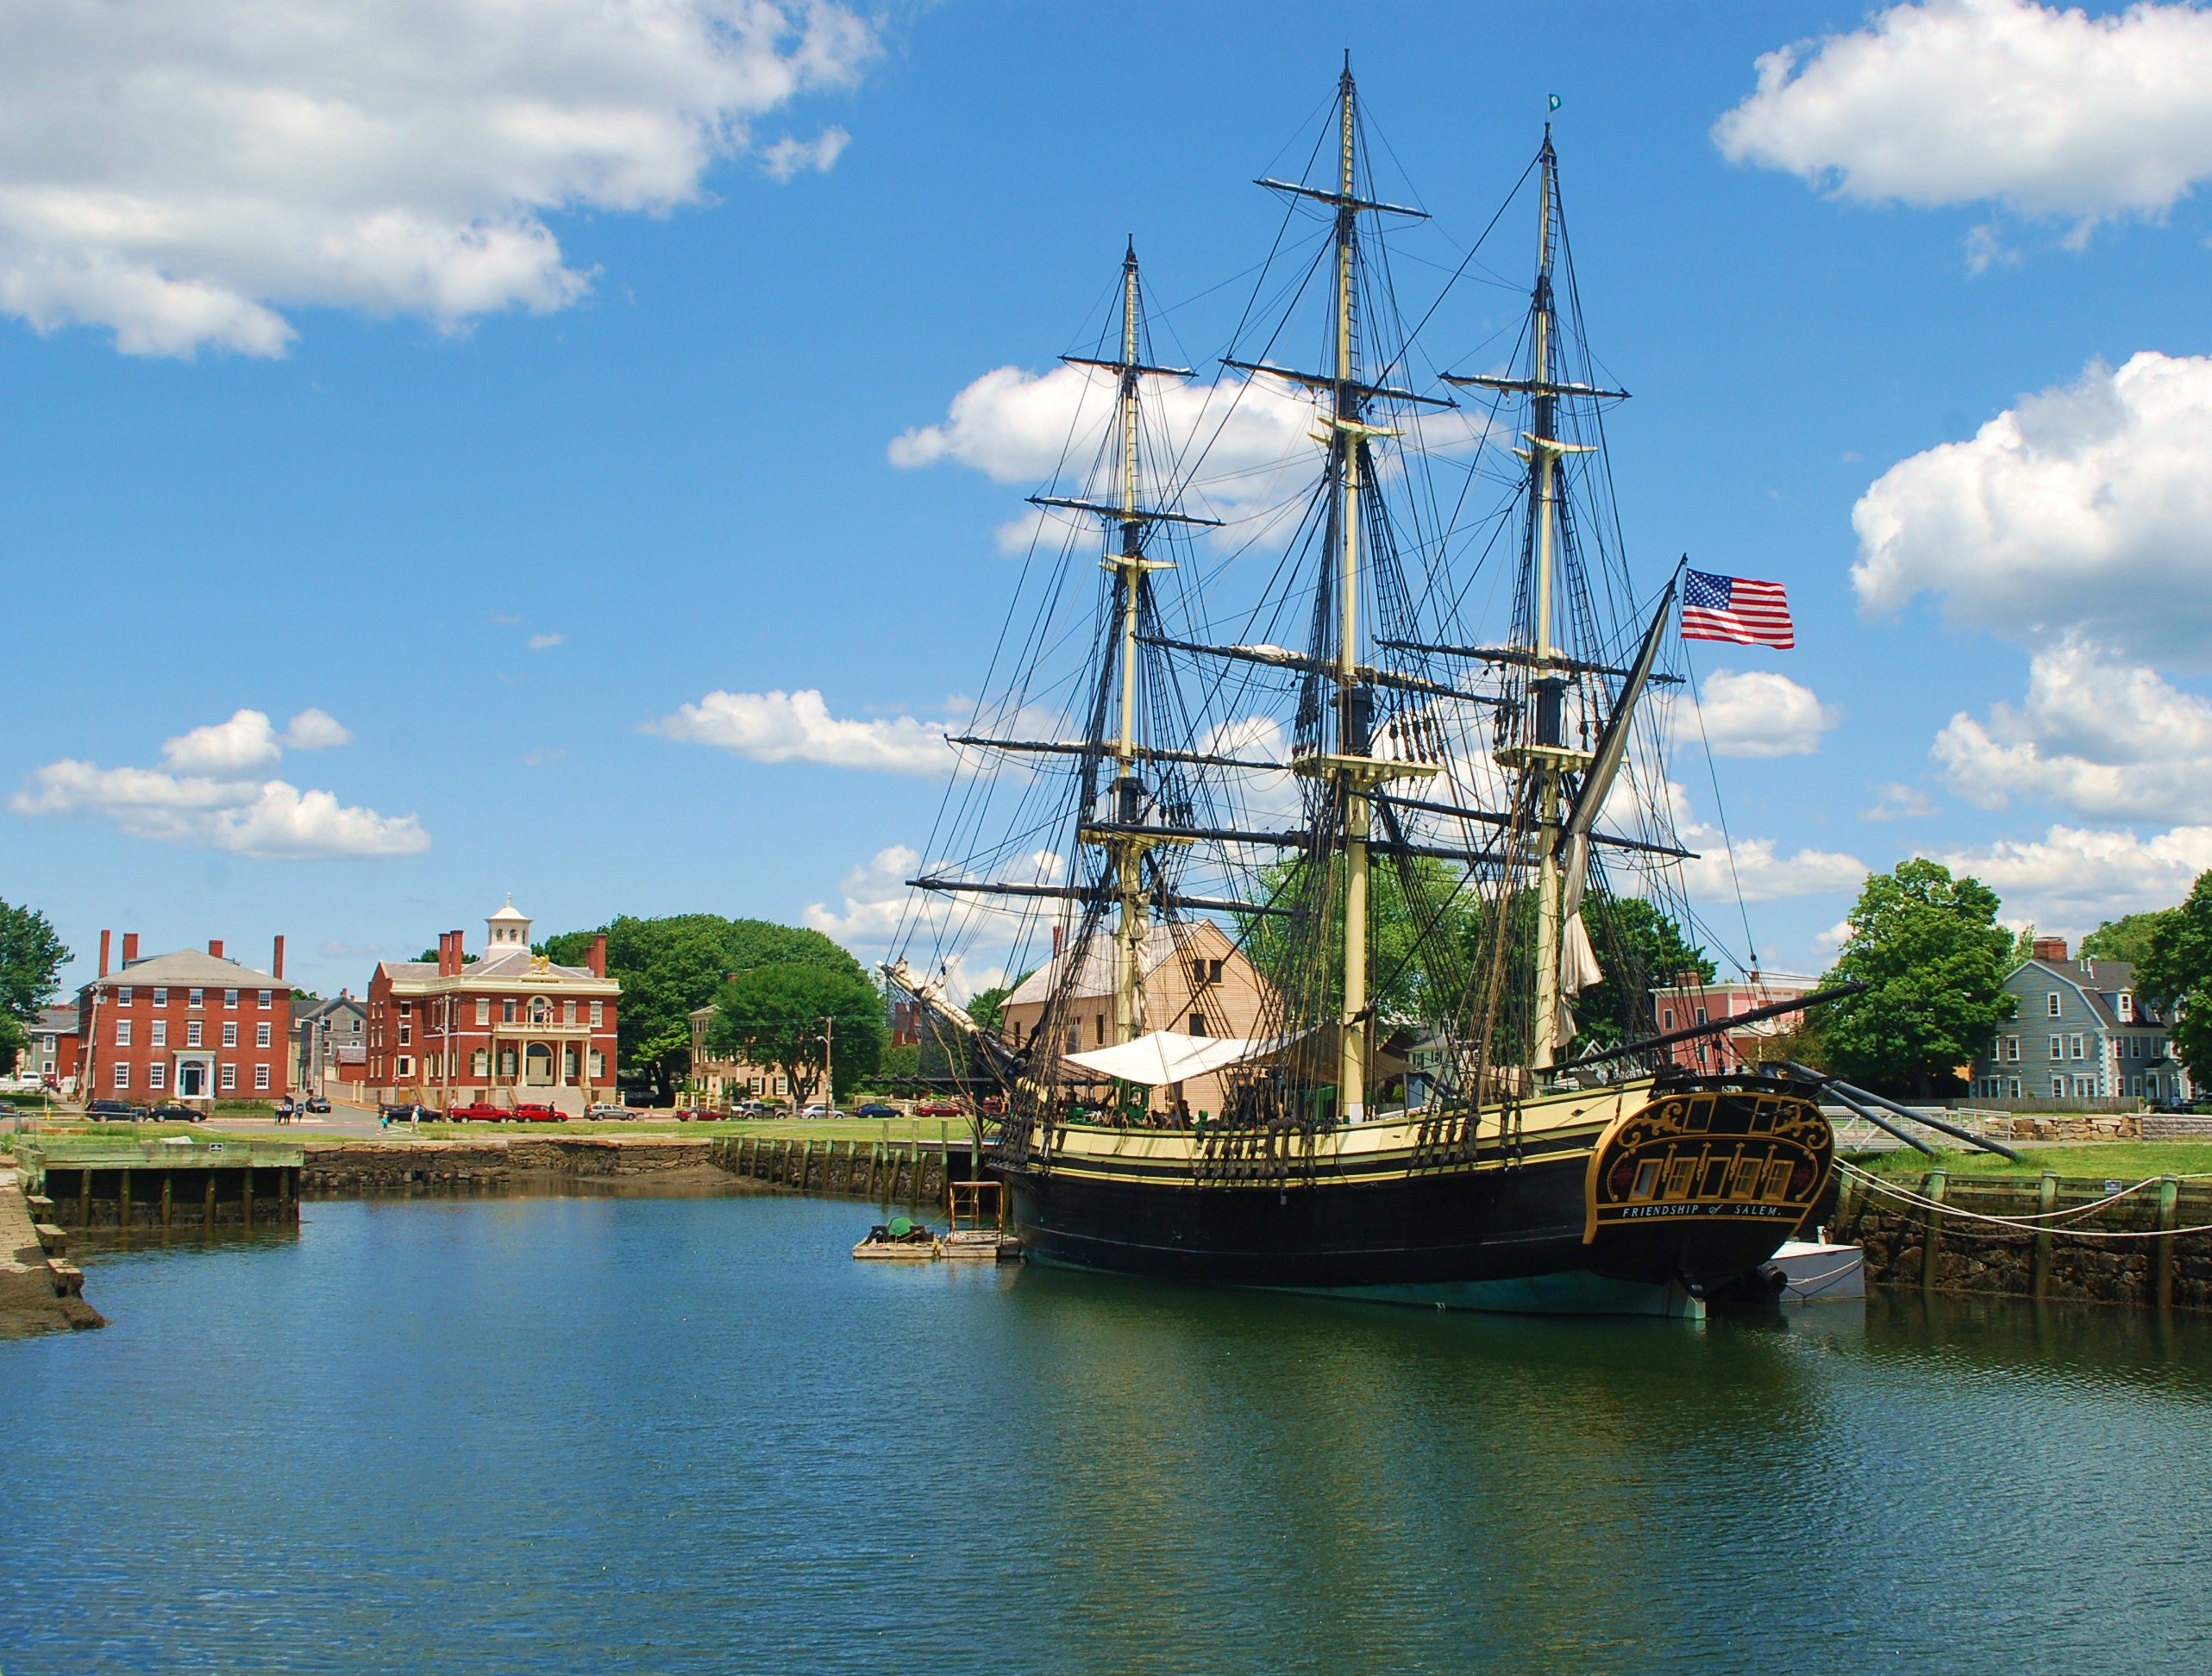 A three mast tall ship on the water under a blue sky with red brick buildings on the shore.